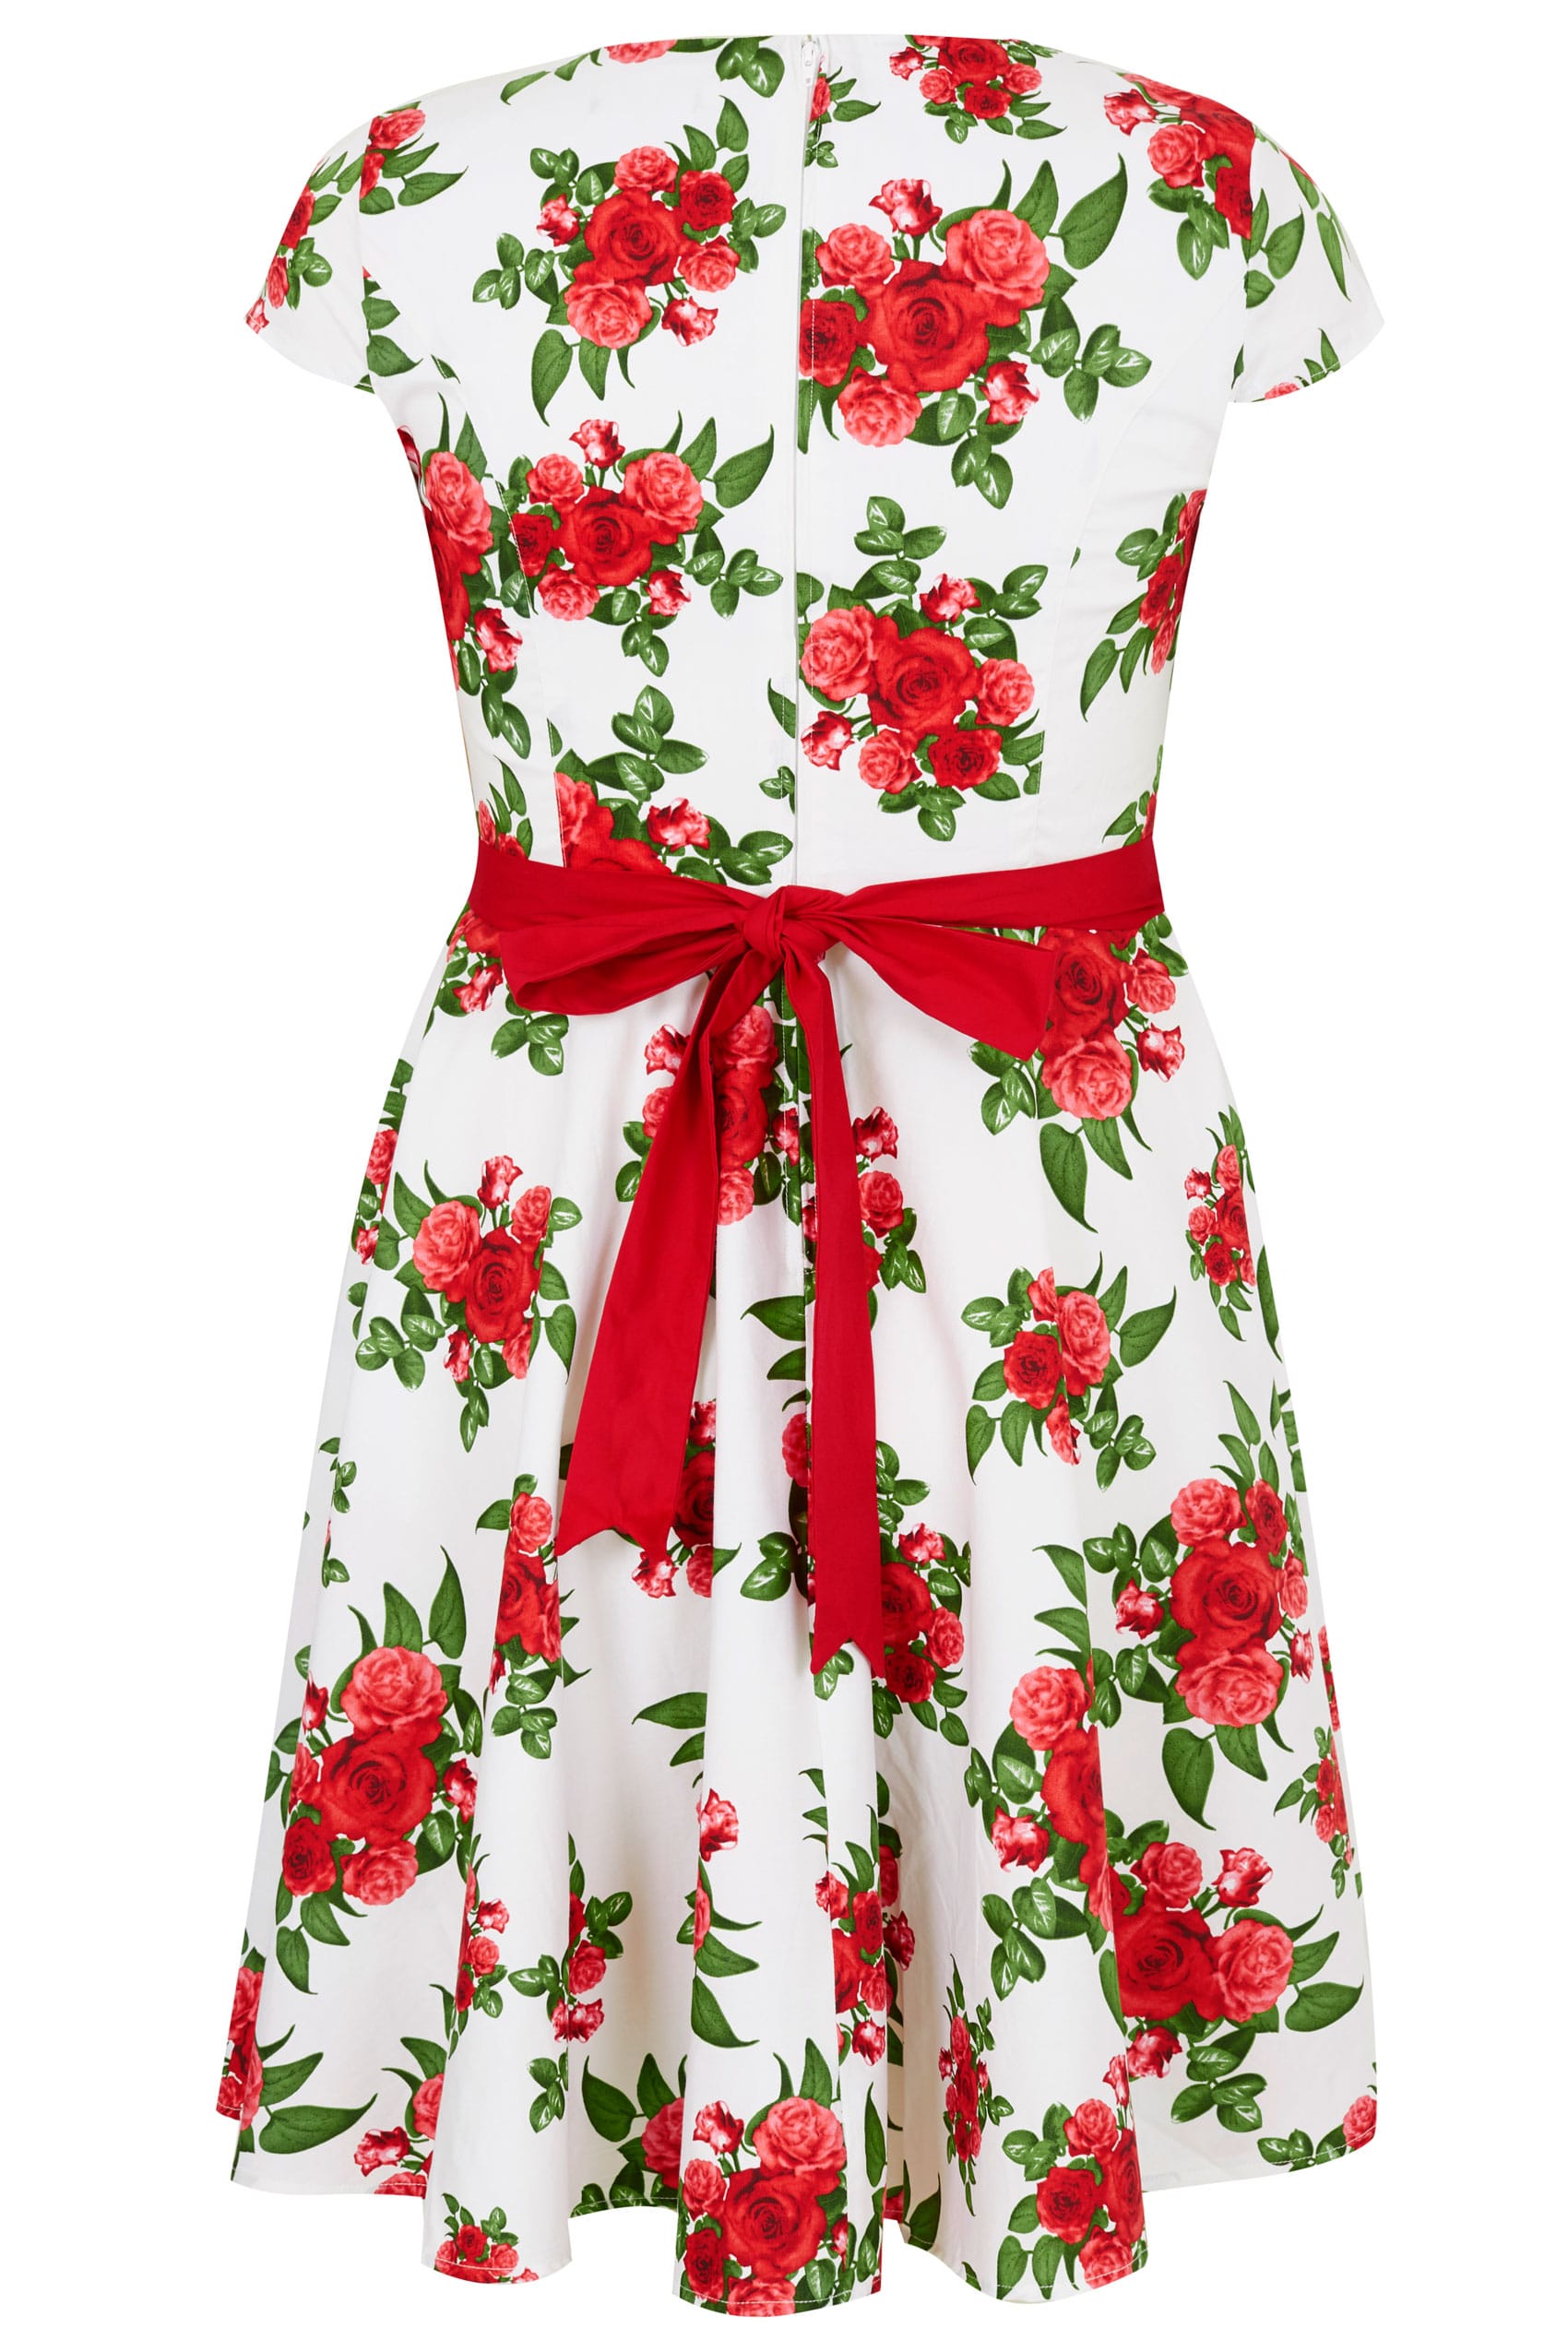 HELL BUNNY White & Red Rose Print Lorene Dress, plus size 16 to 32